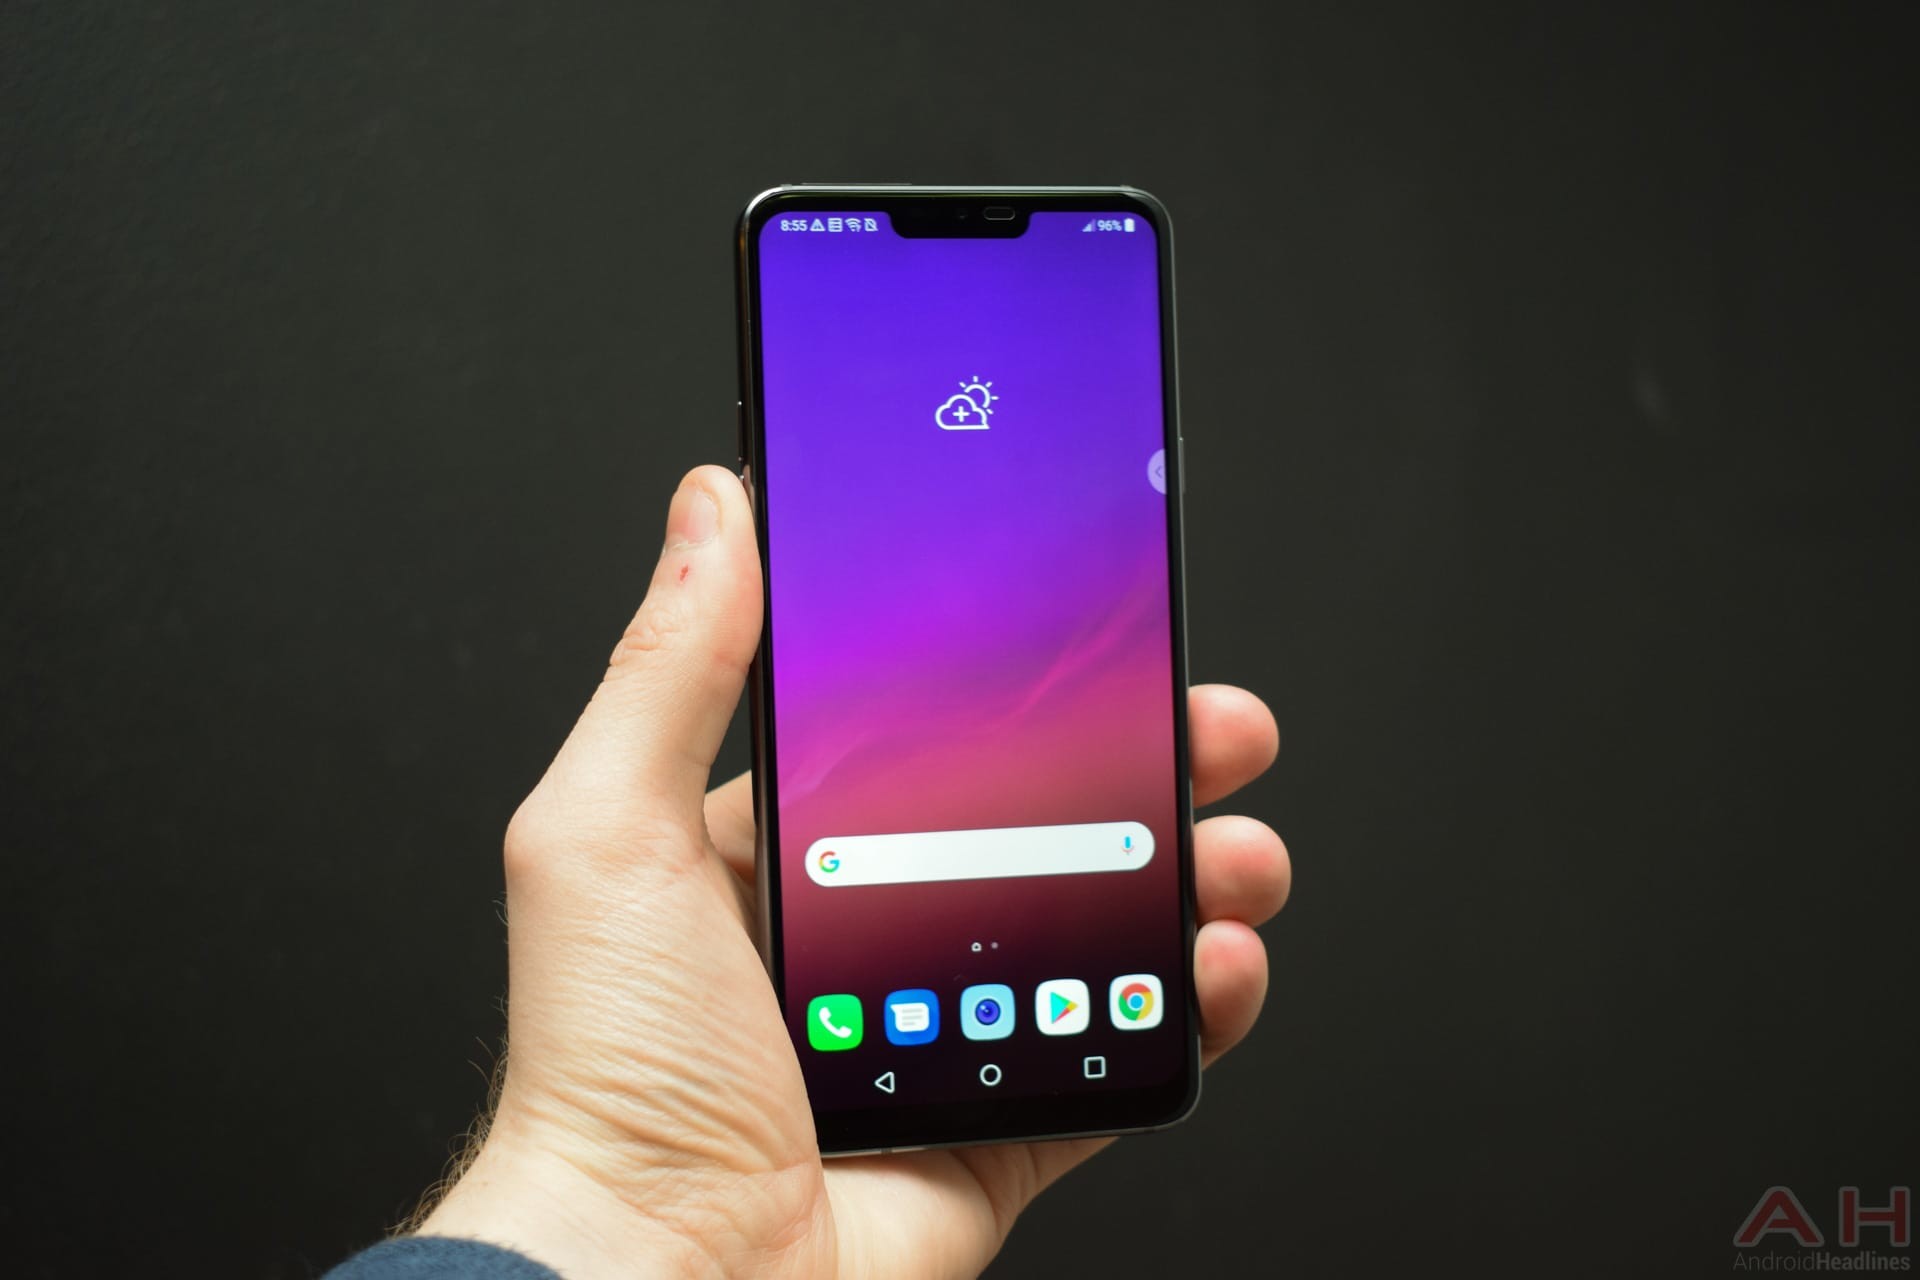 1920x1280 LG G7 ThinQ Wallpapers Are Now Available For Download | Android Headlines